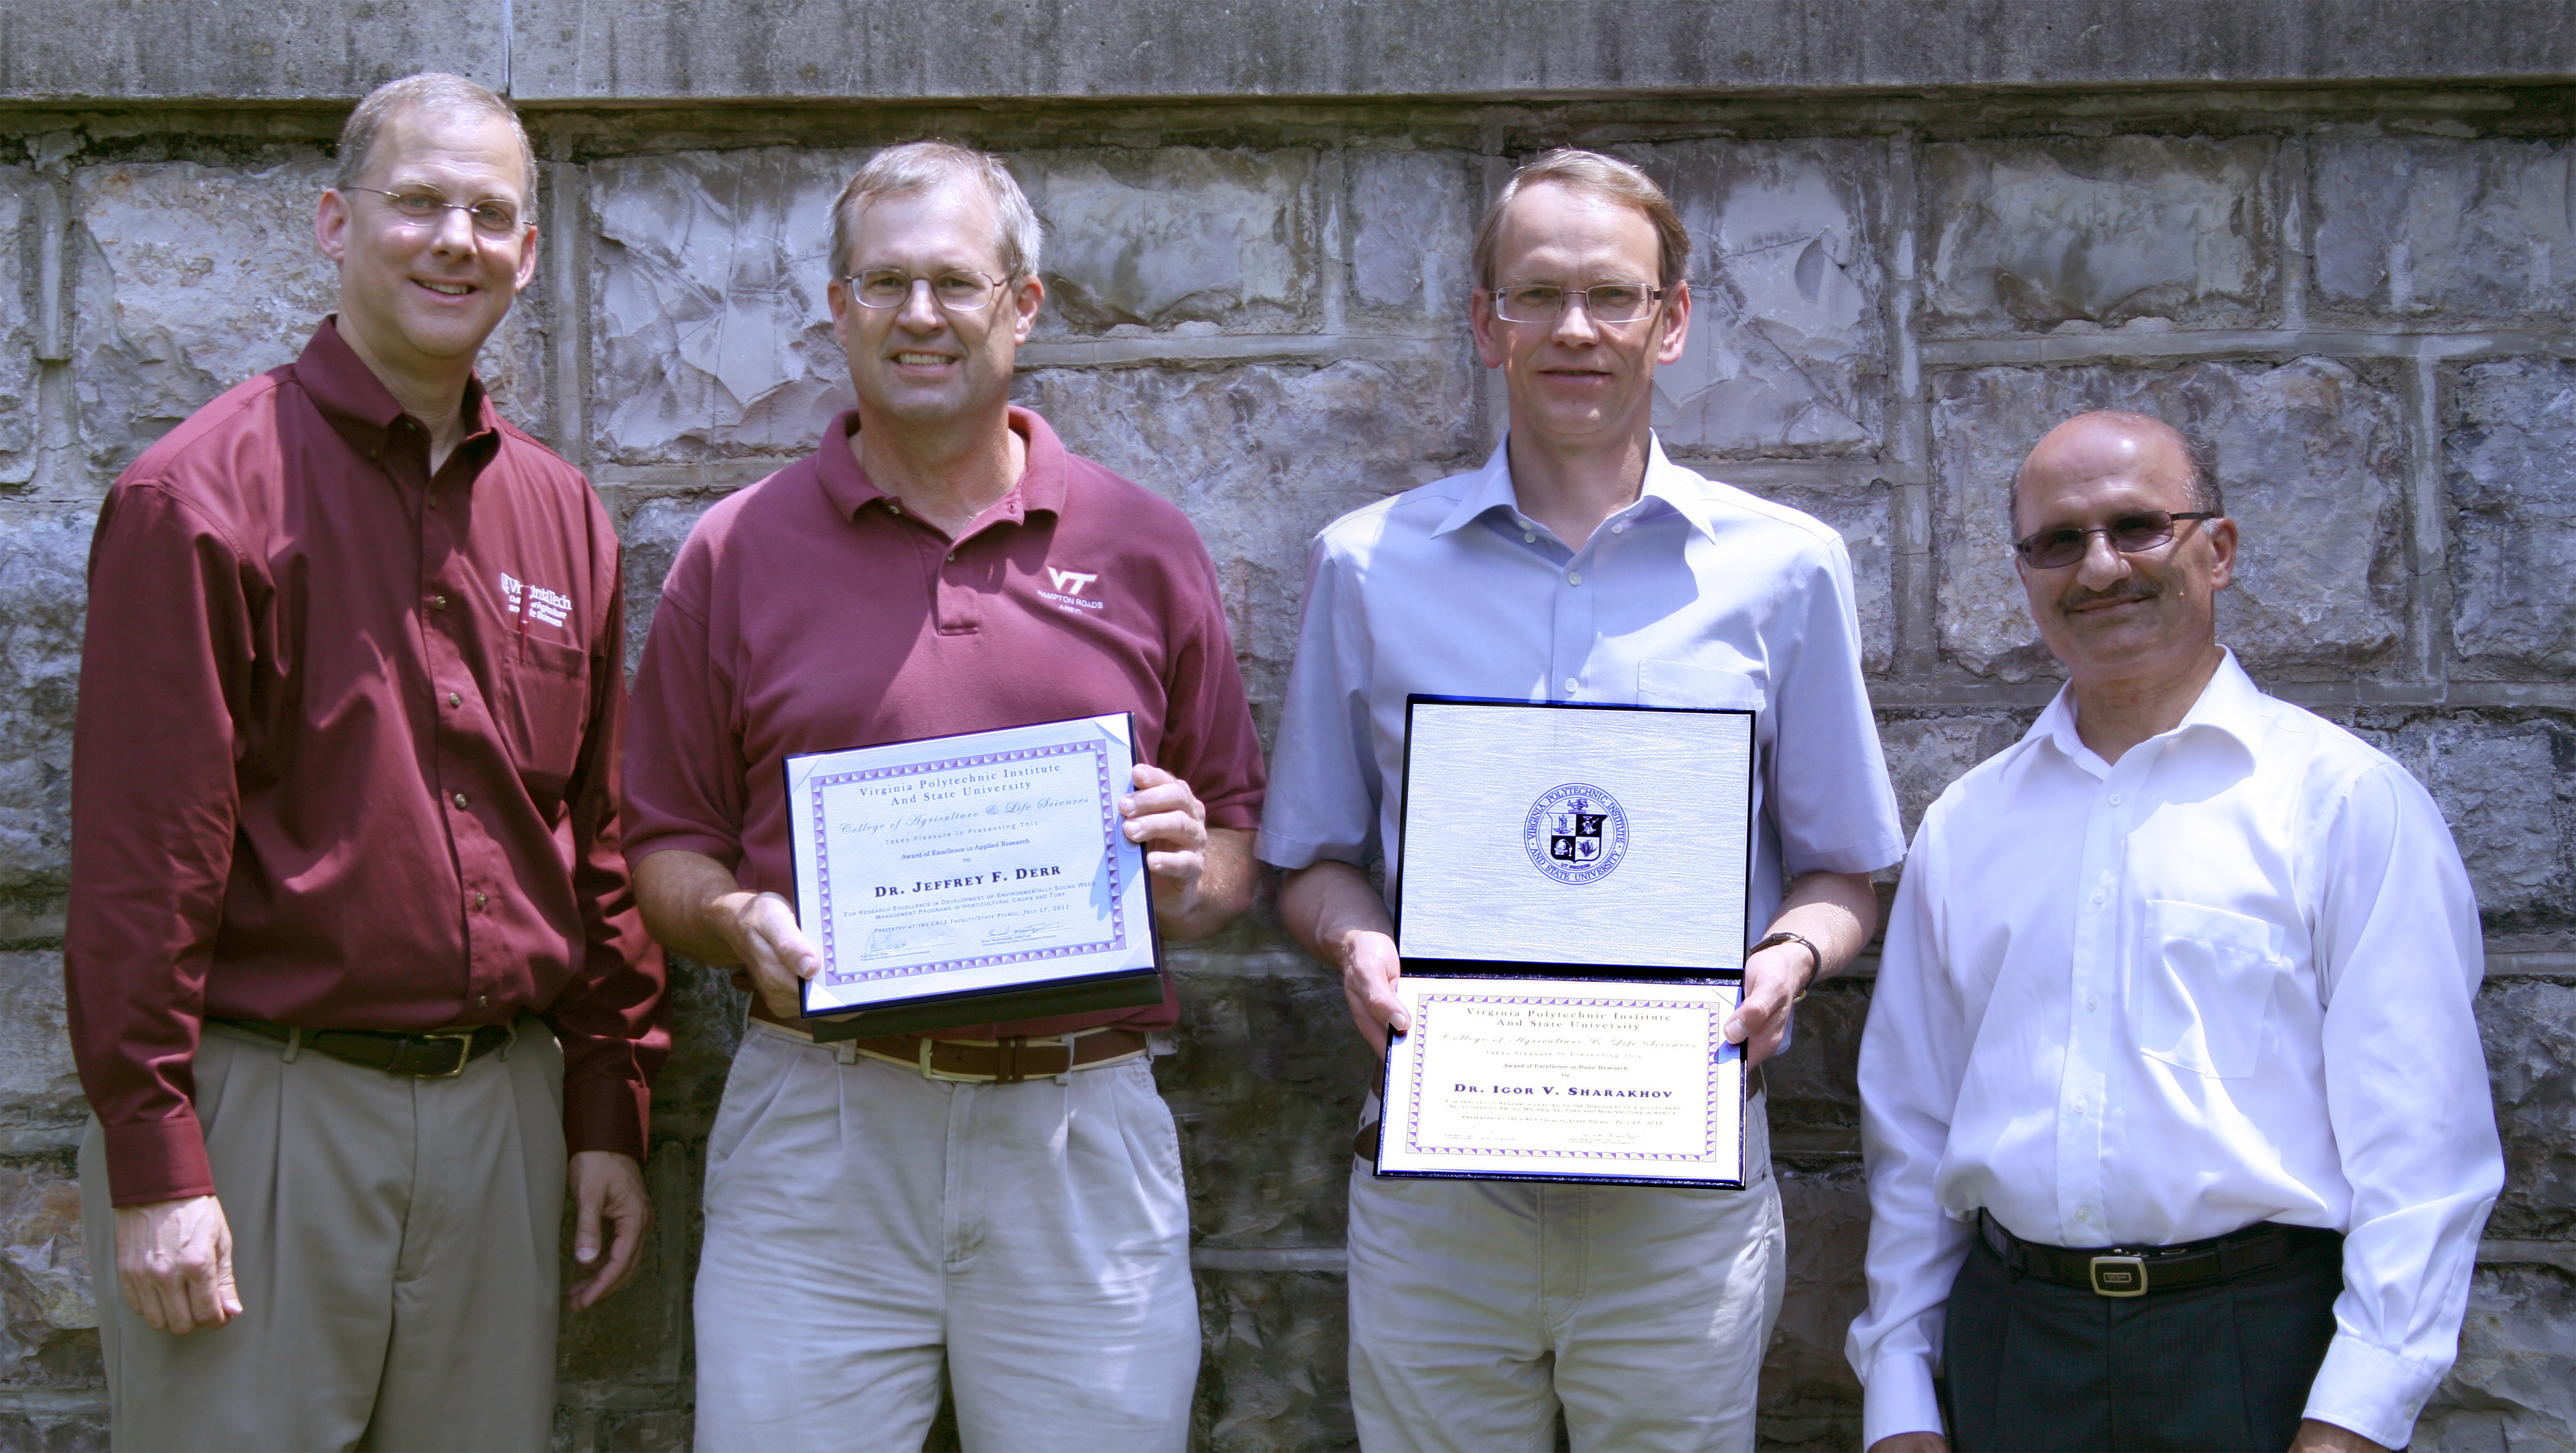 Pictured left to right: Alan Grant, Jeffrey Derr, Igor Sharakhov, and Saied Mostaghimi.  Jeffrey Derr and Igor Sharakhov hold their awards.